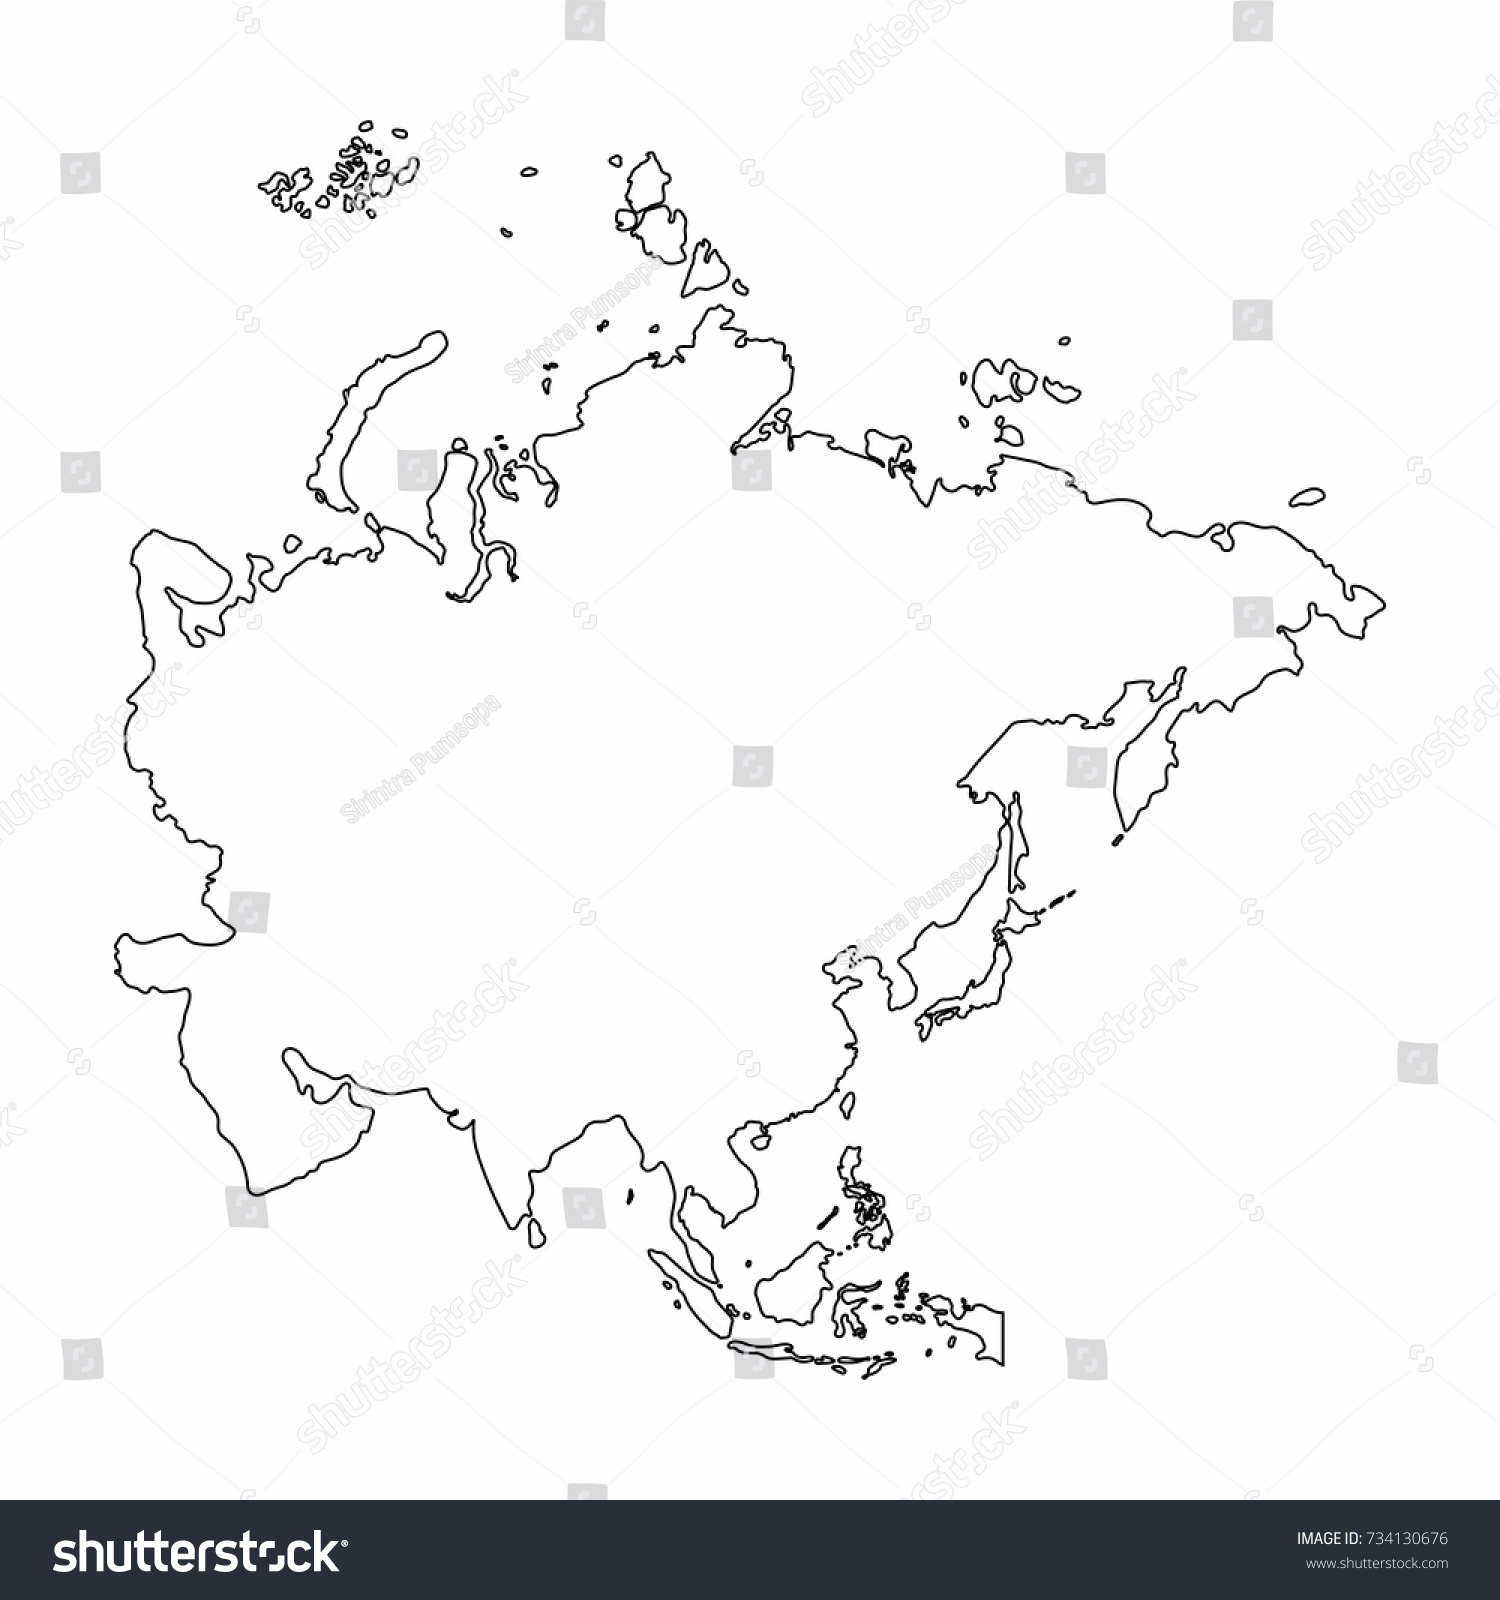 Asia Map Outline Graphic Freehand Drawing Stock Vector Royalty Free 734130676 Shutterstock 9198